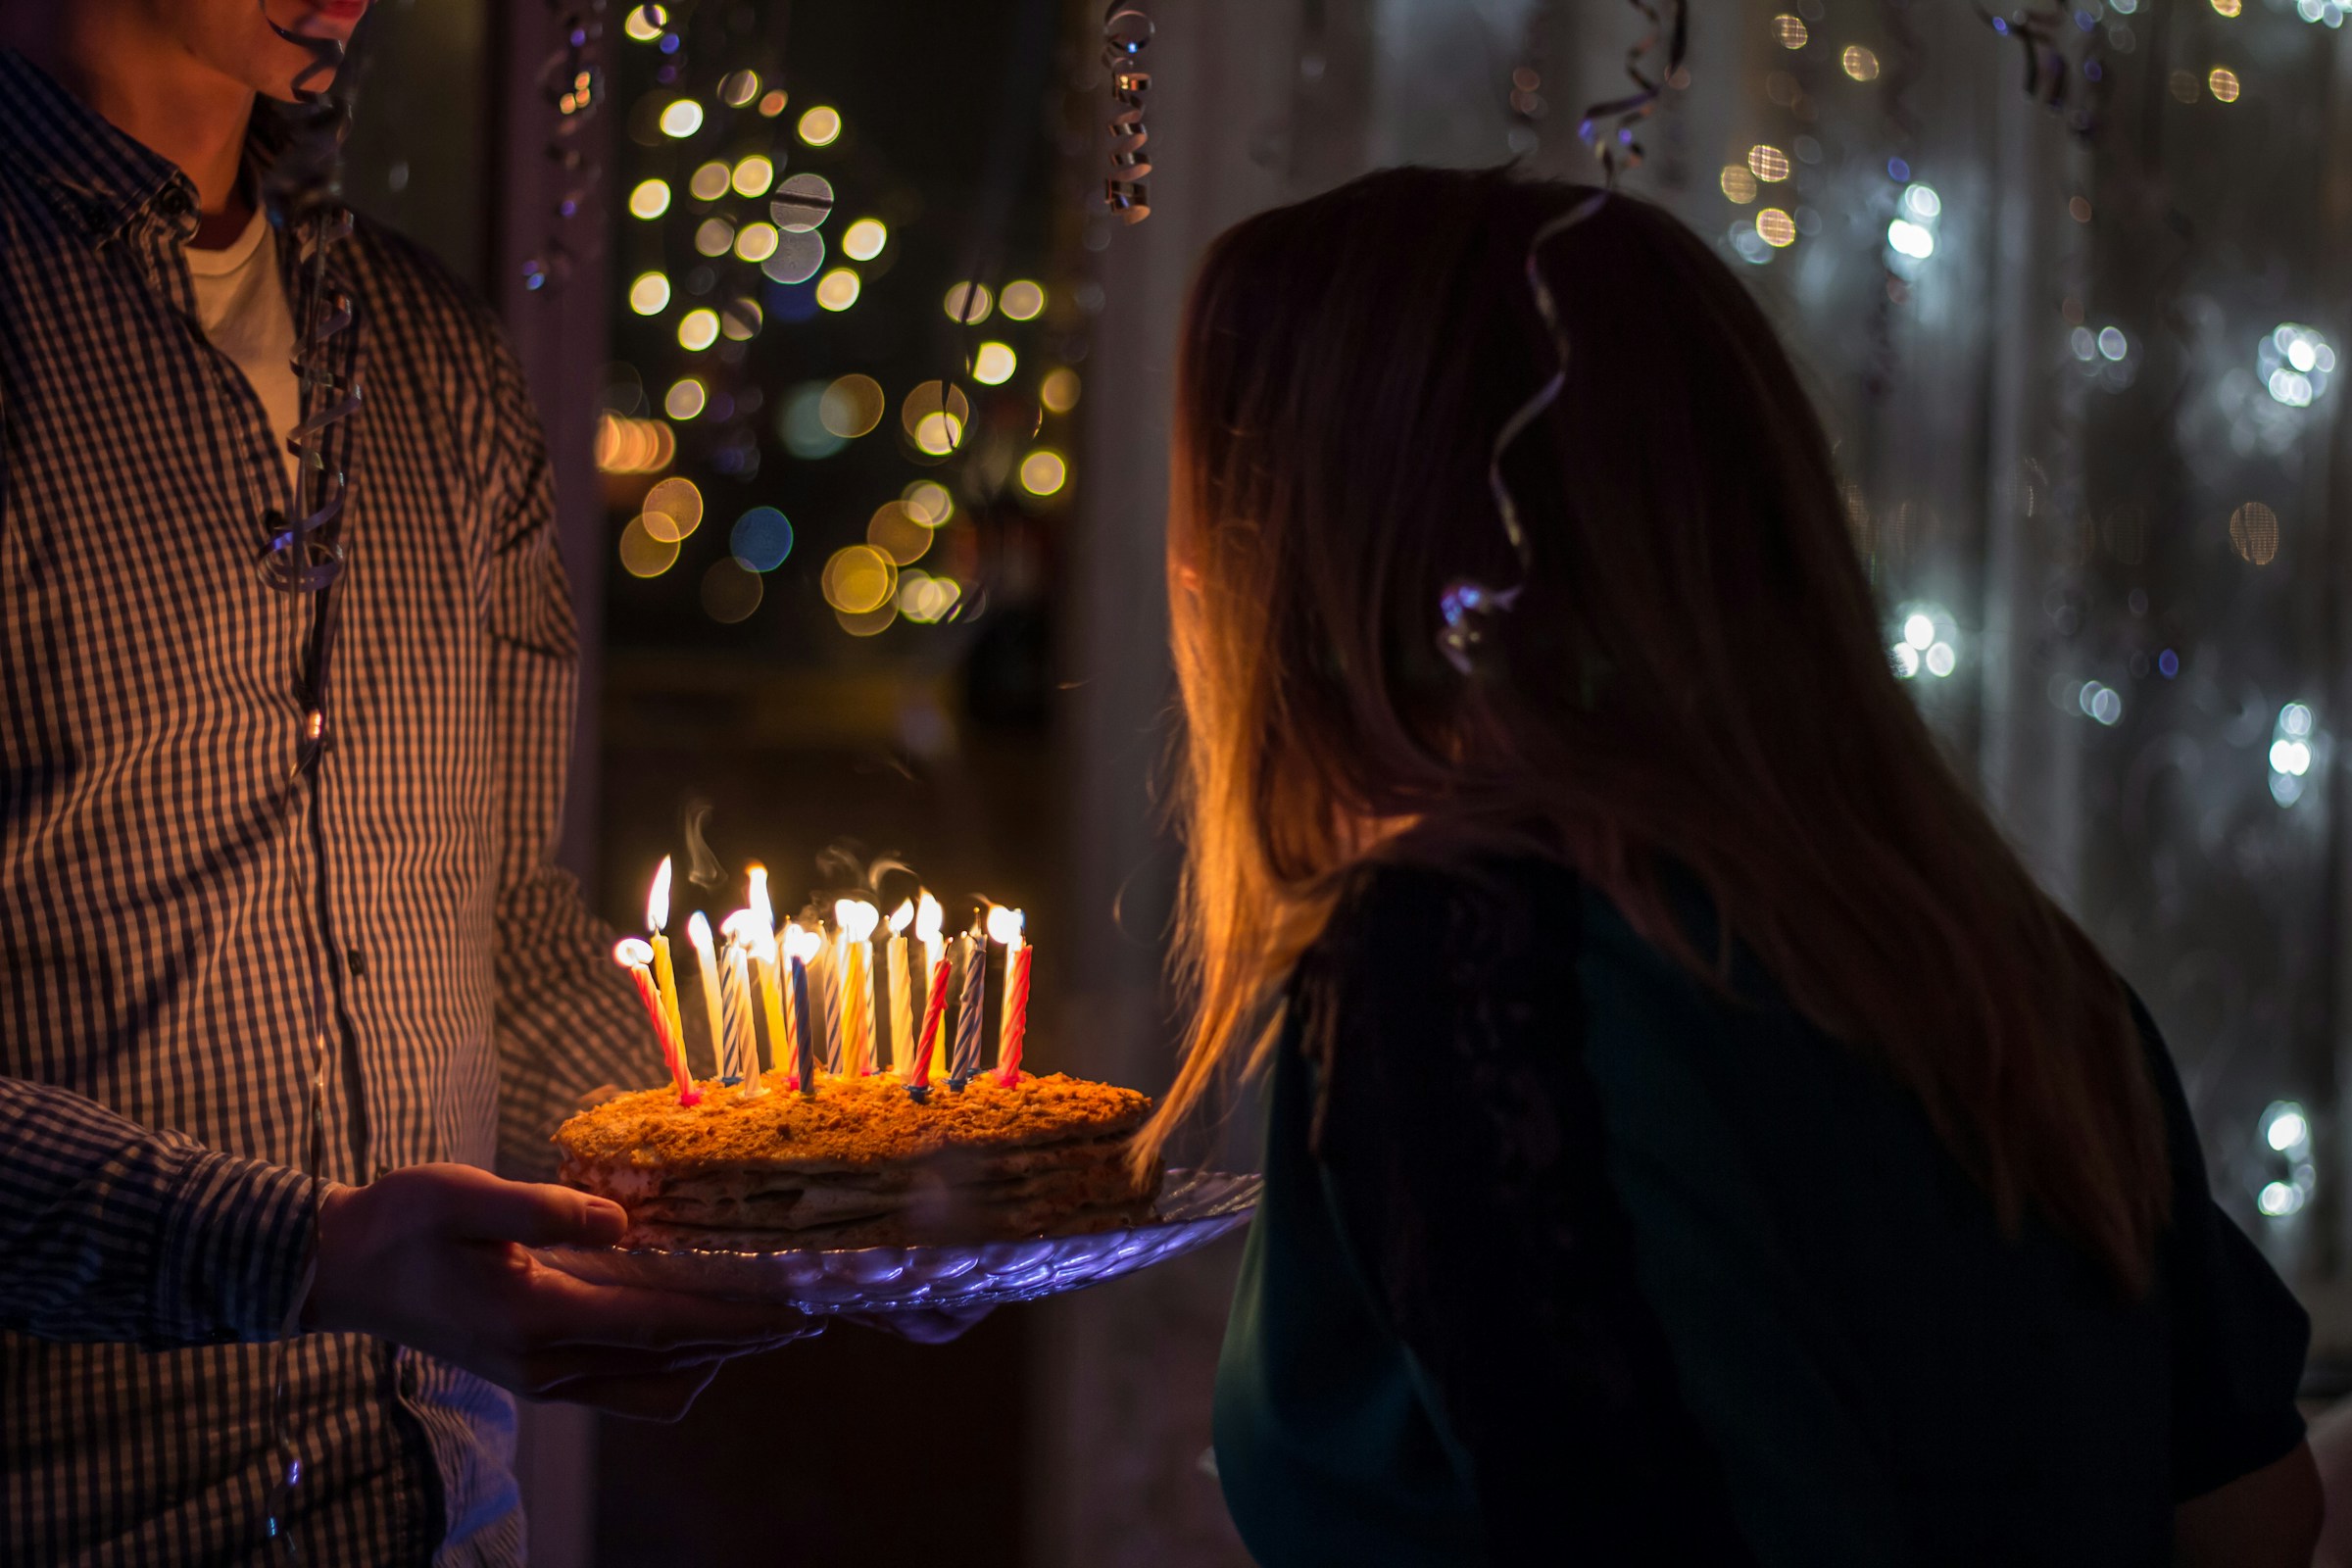 A young girl about to blow her birthday candles | Source: Unsplash